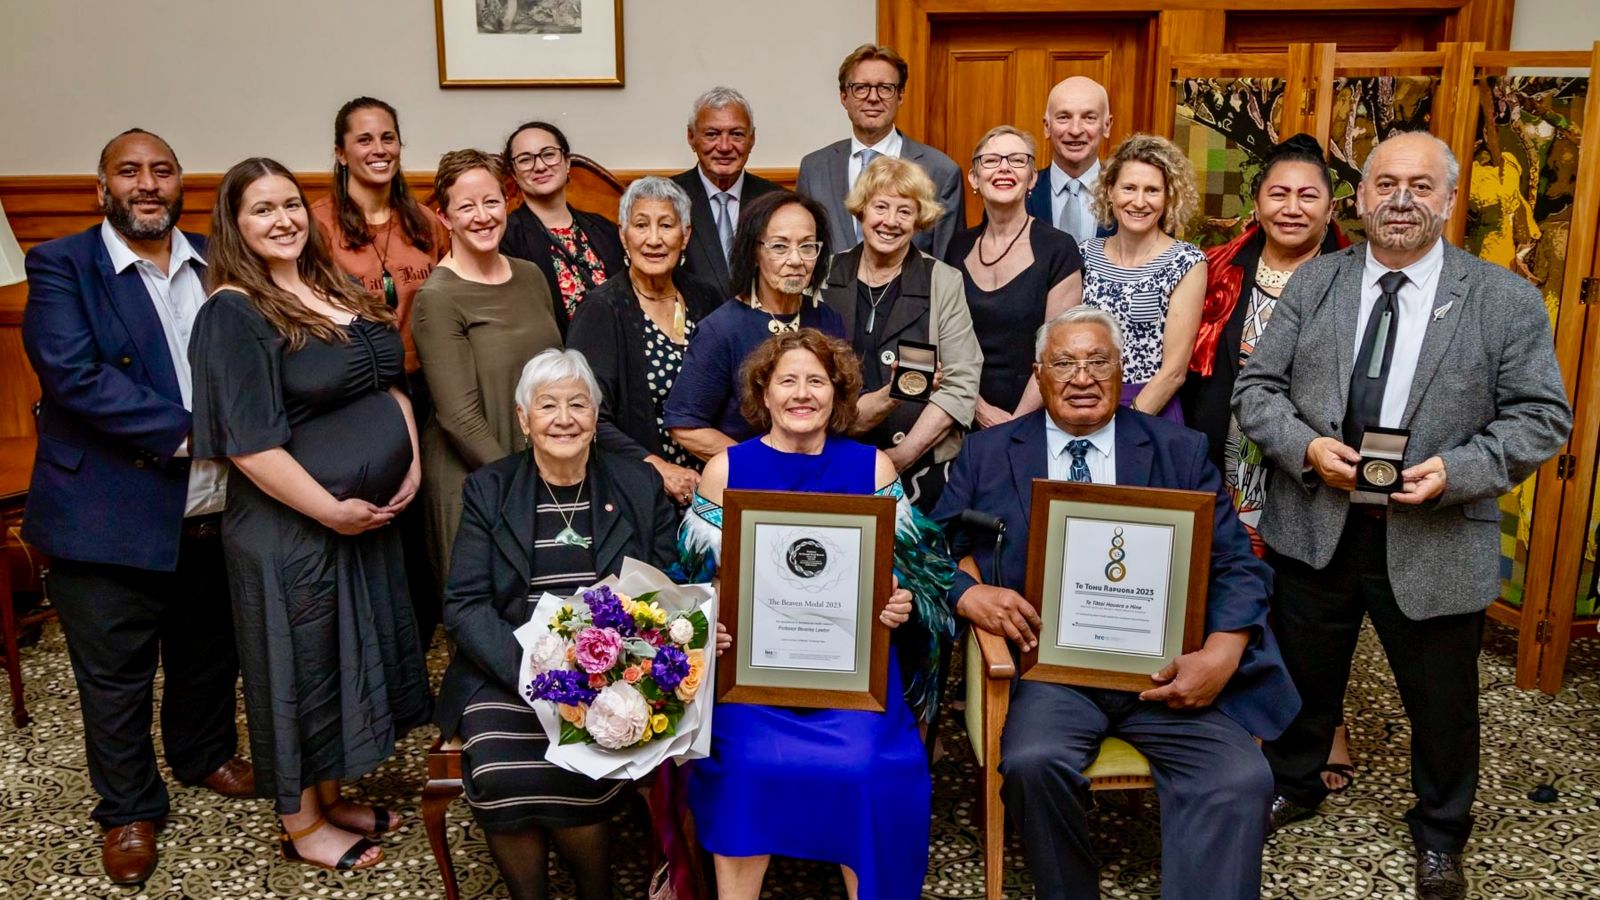 The centre team post for a photo with their awards at government house